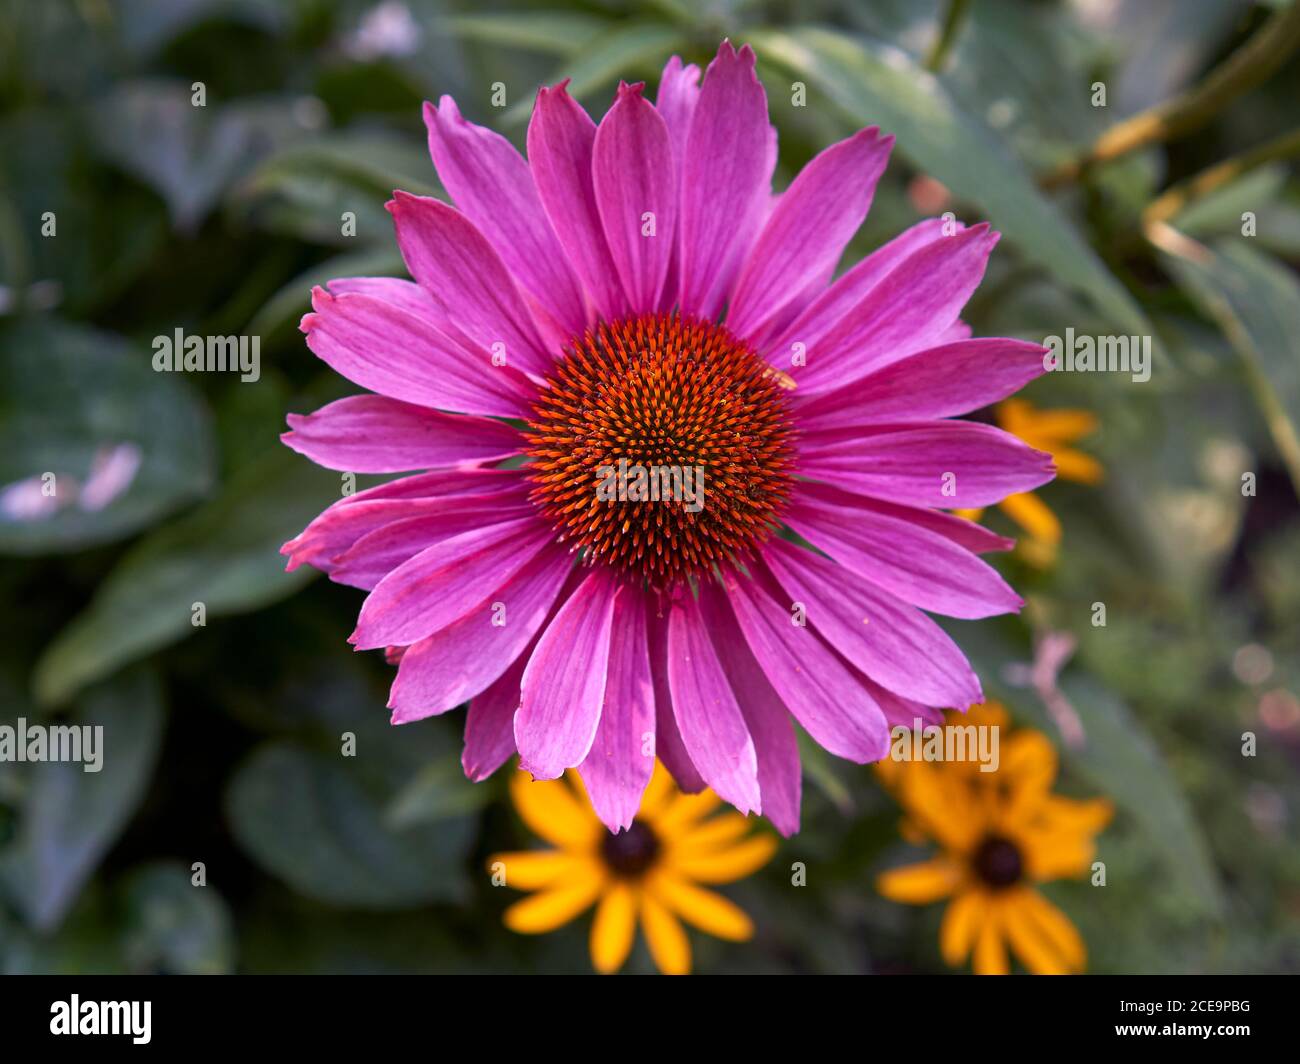 Closeup of a purple Echinacea flower or purple coneflower blooming in summer Stock Photo